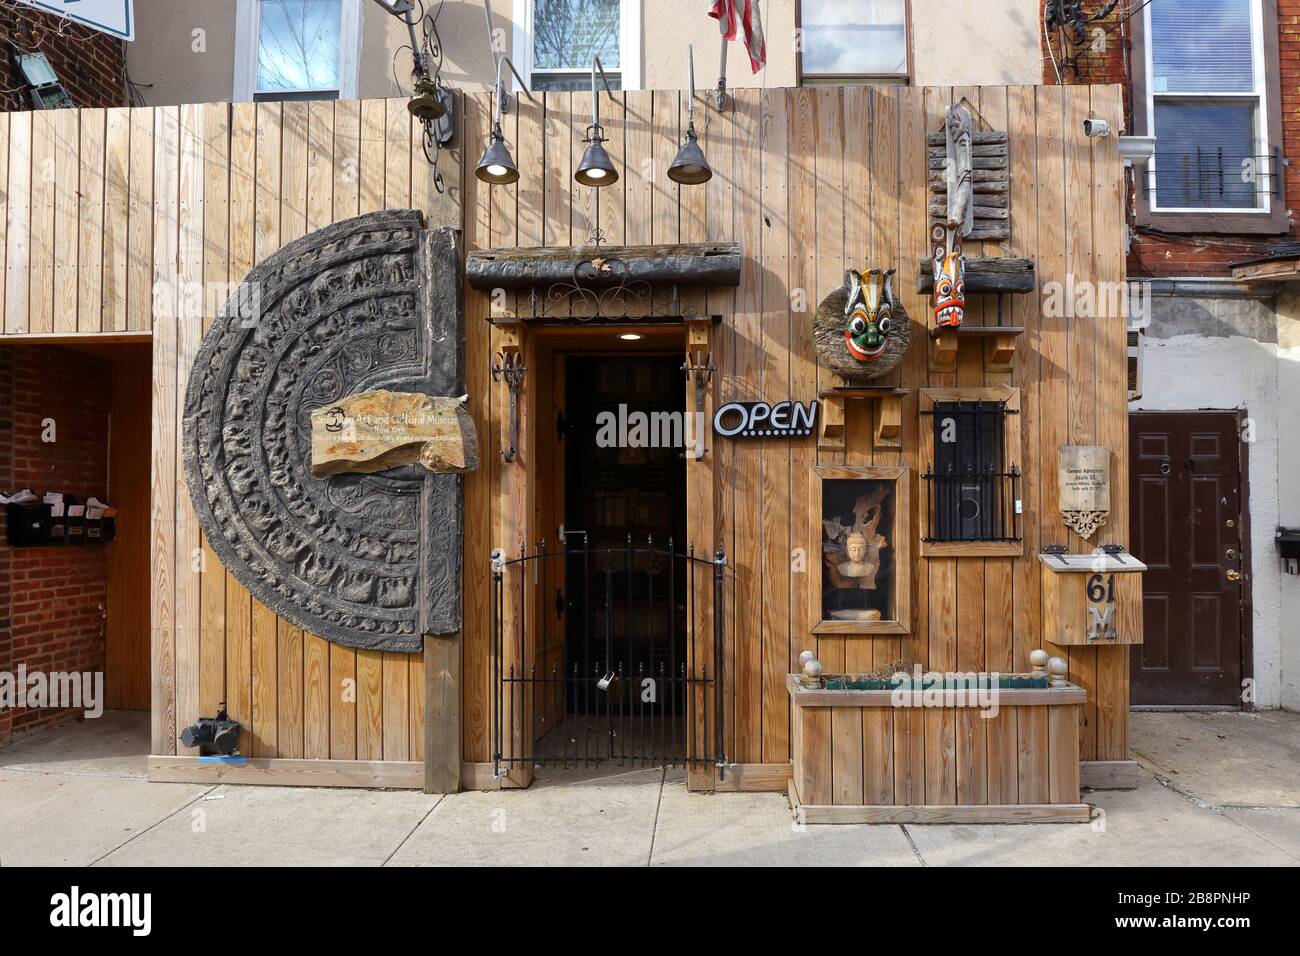 Sri Lankan Art & Cultural Museum, 61 Canal St, Staten Island, New York. NYC storefront photo of a cultural museum in Stapleton. Stock Photo